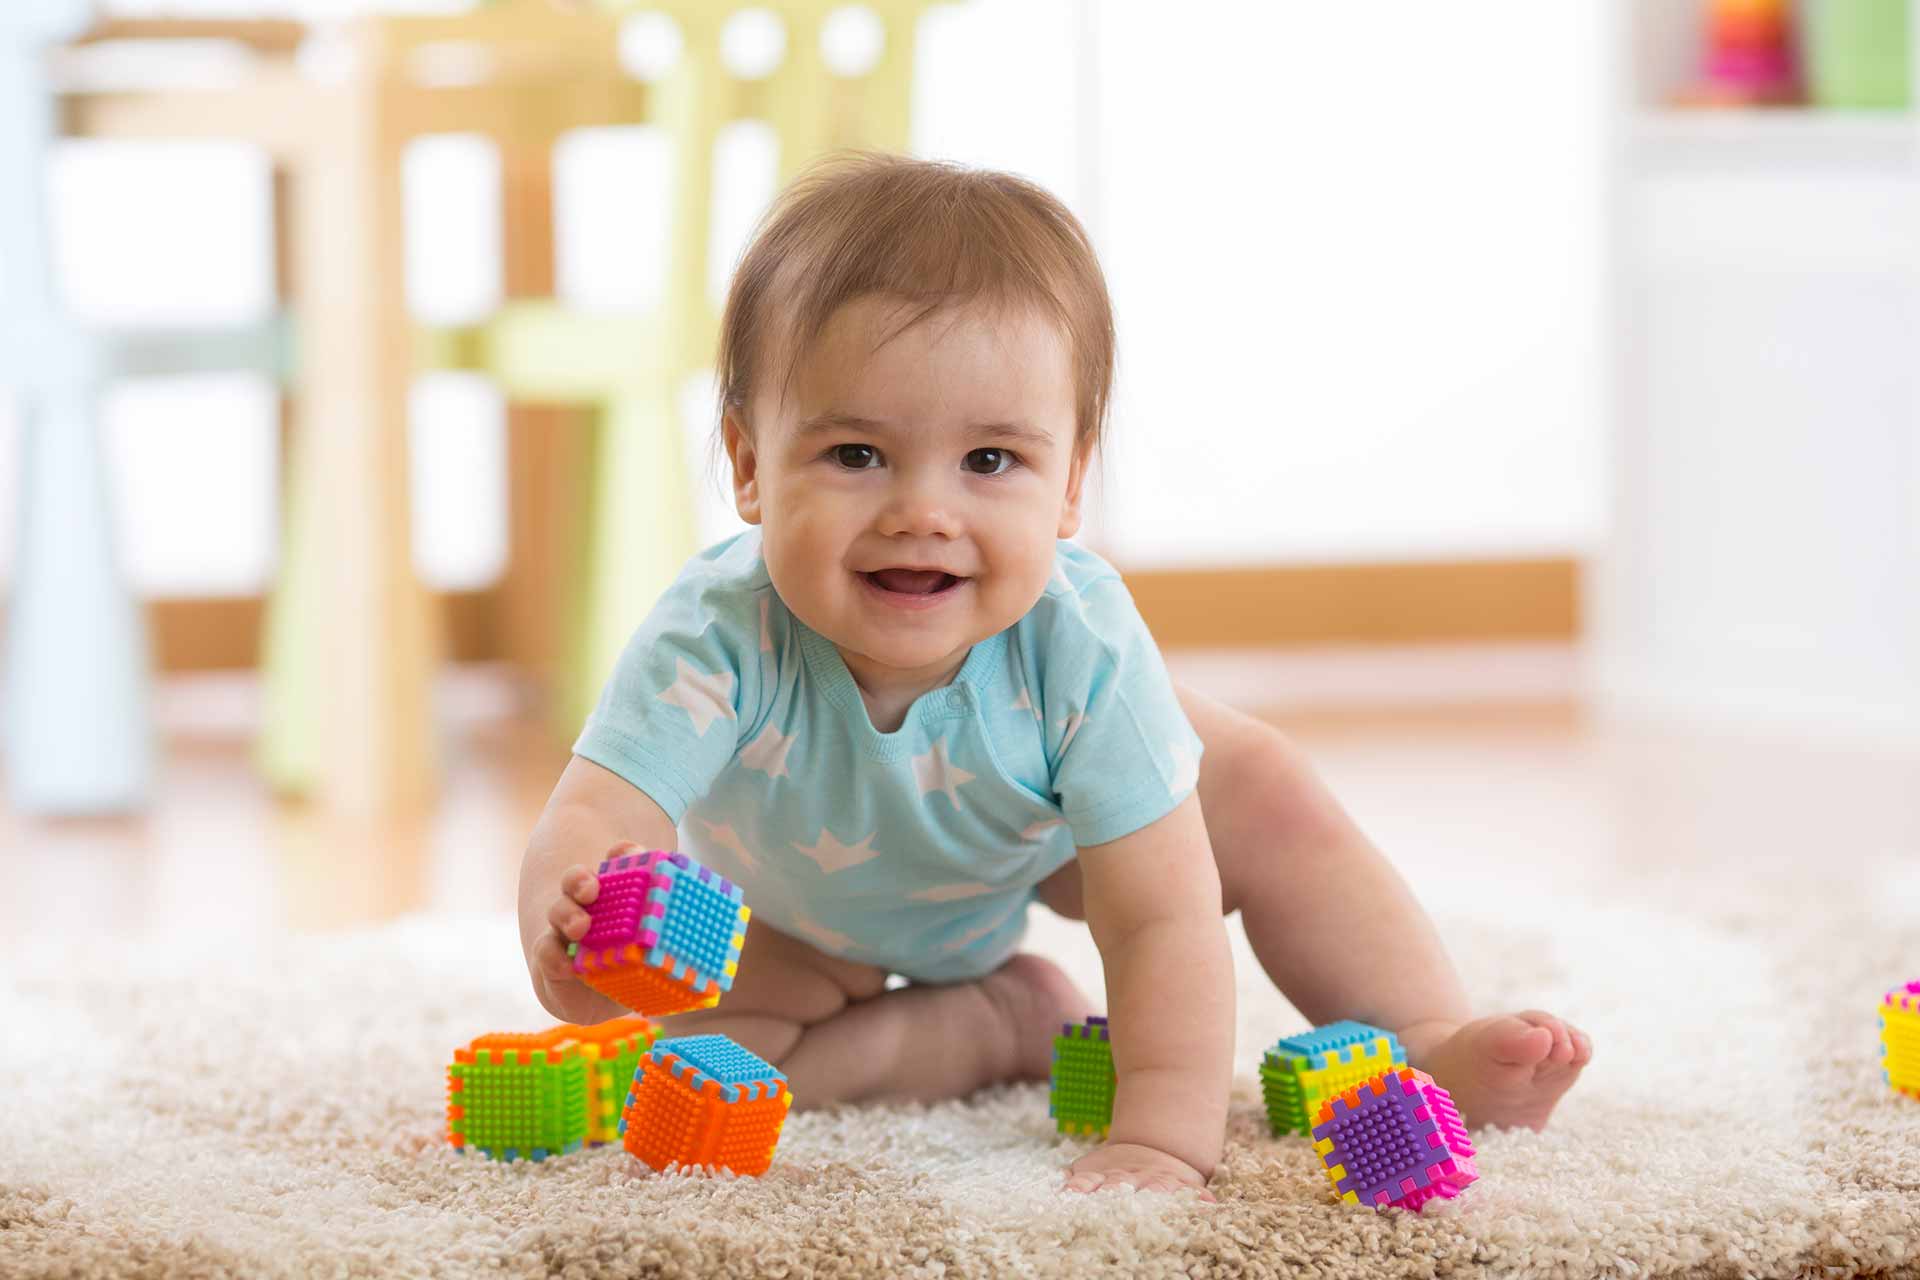 Appropriate Play and Activities for a Baby | Penfield Building Blocks